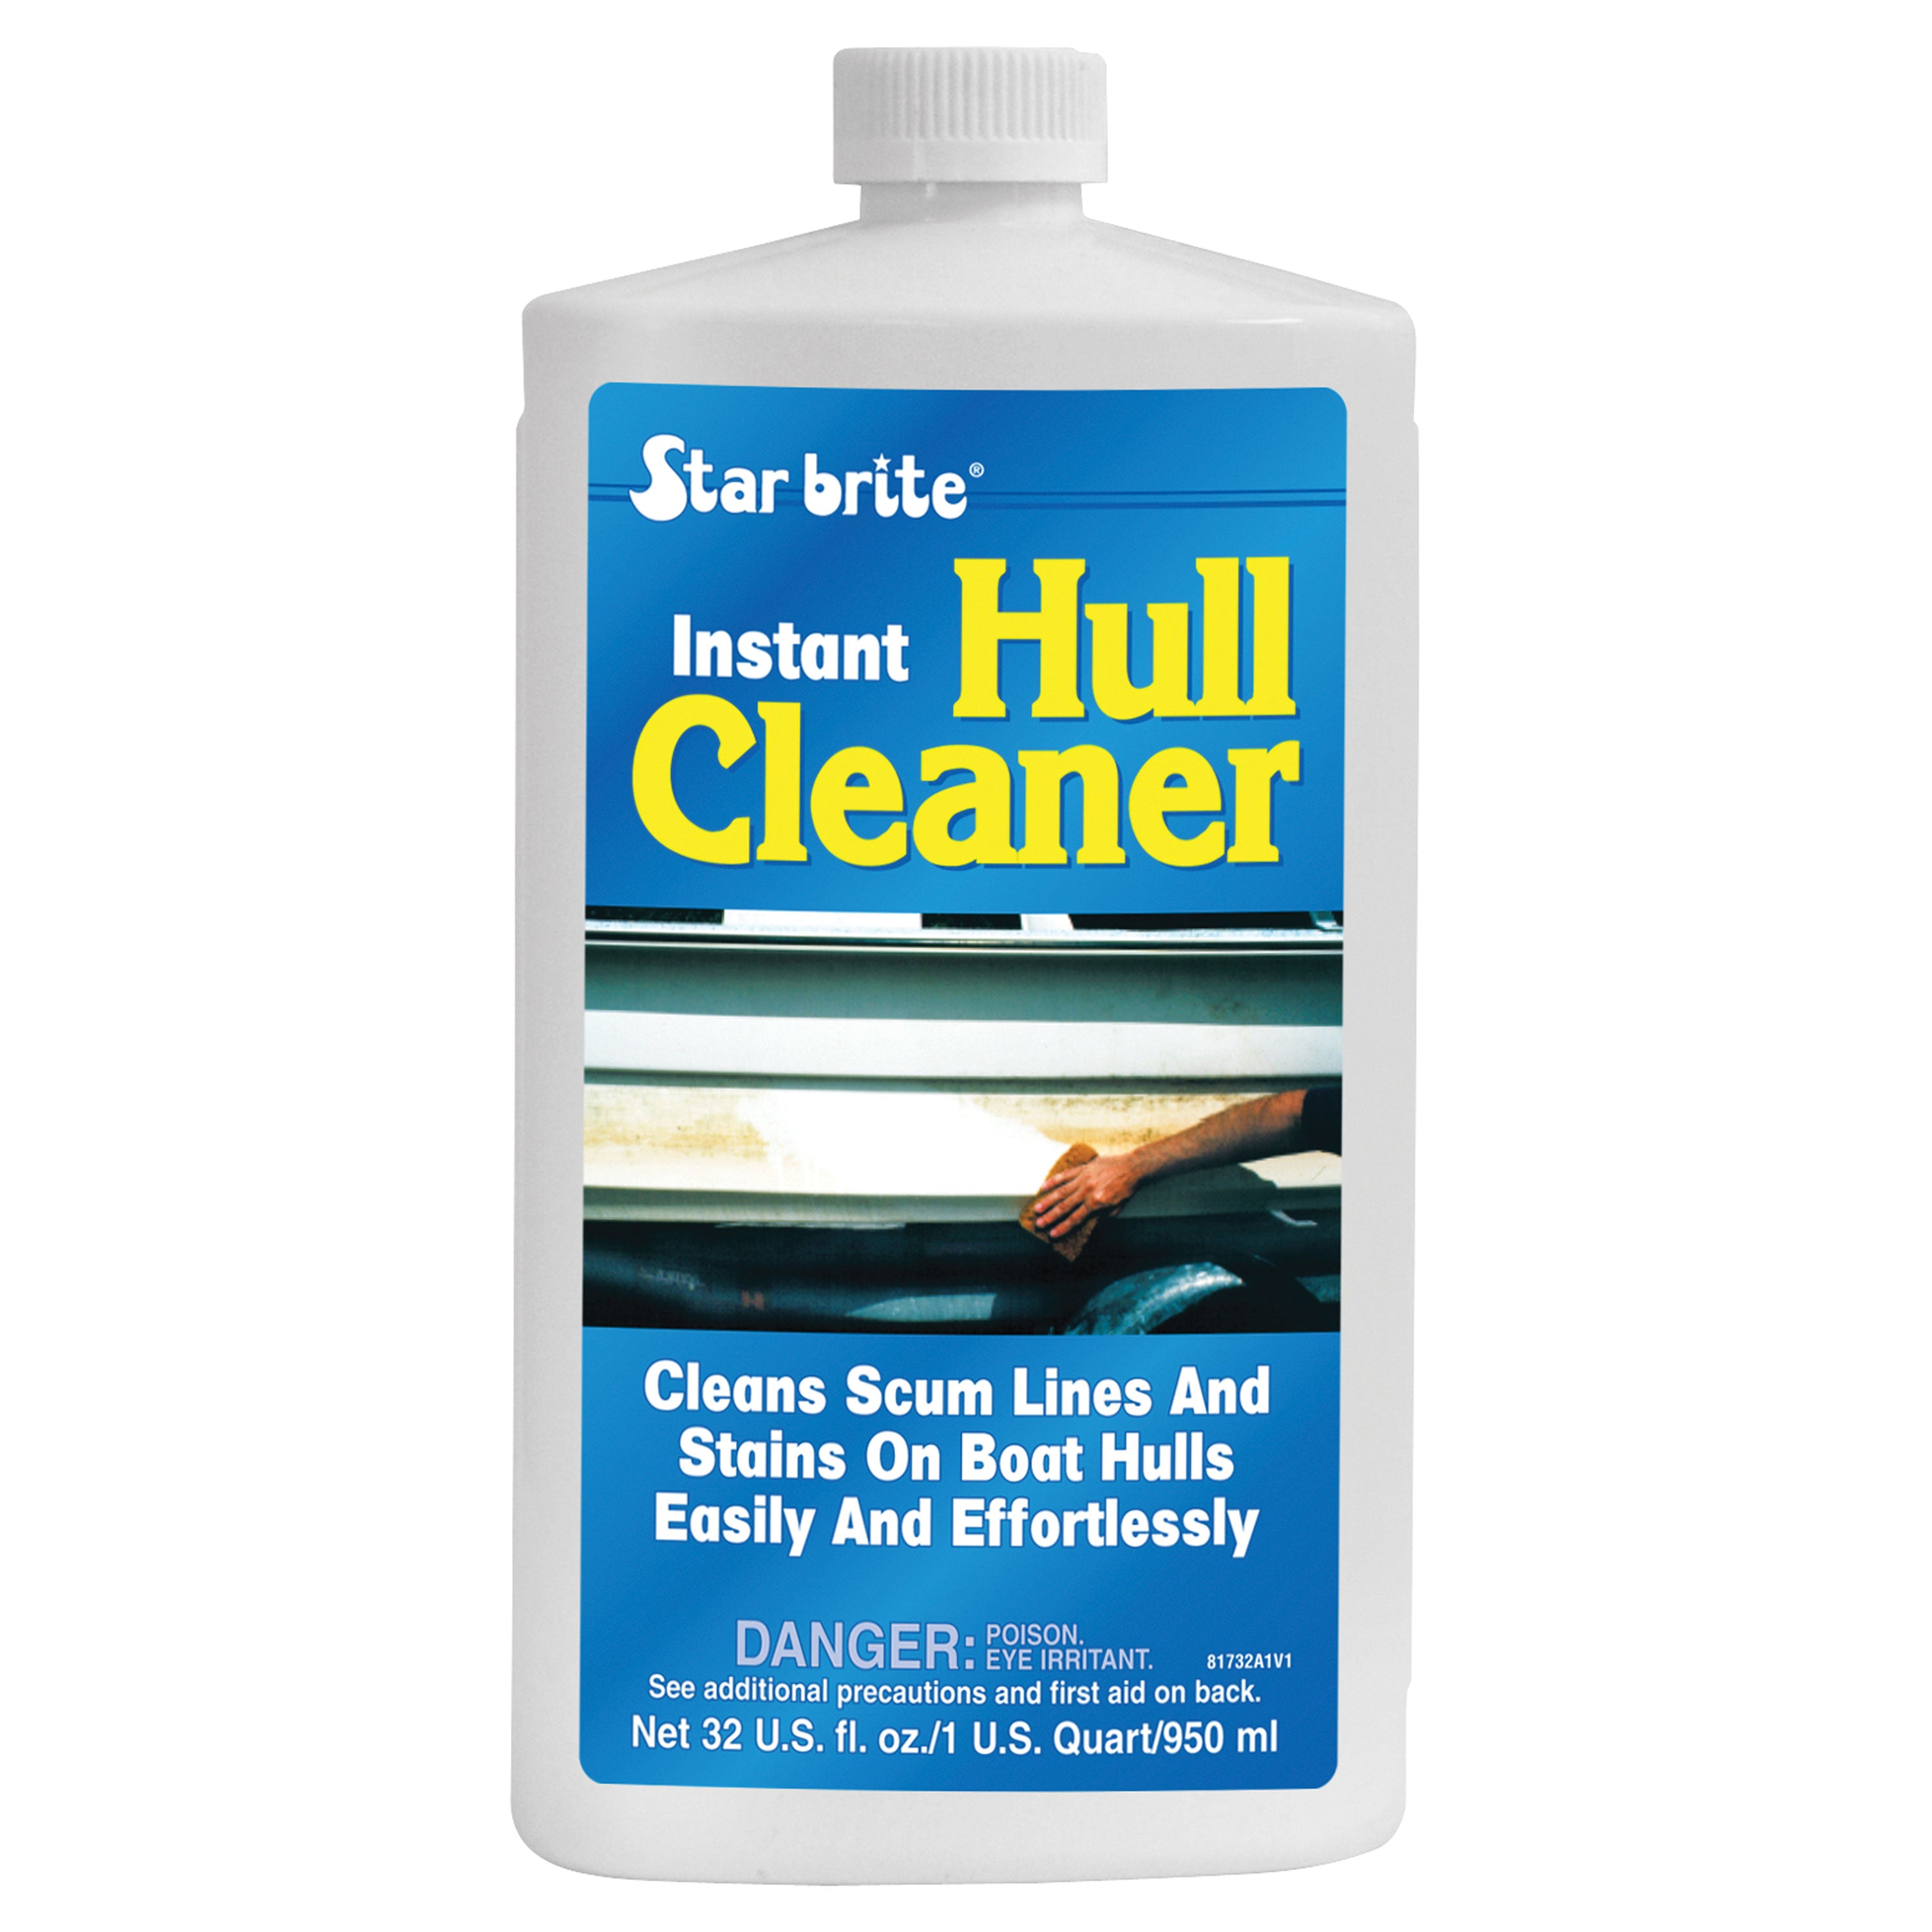 Star brite 081732PW Instant Hull Cleaner - 32 oz